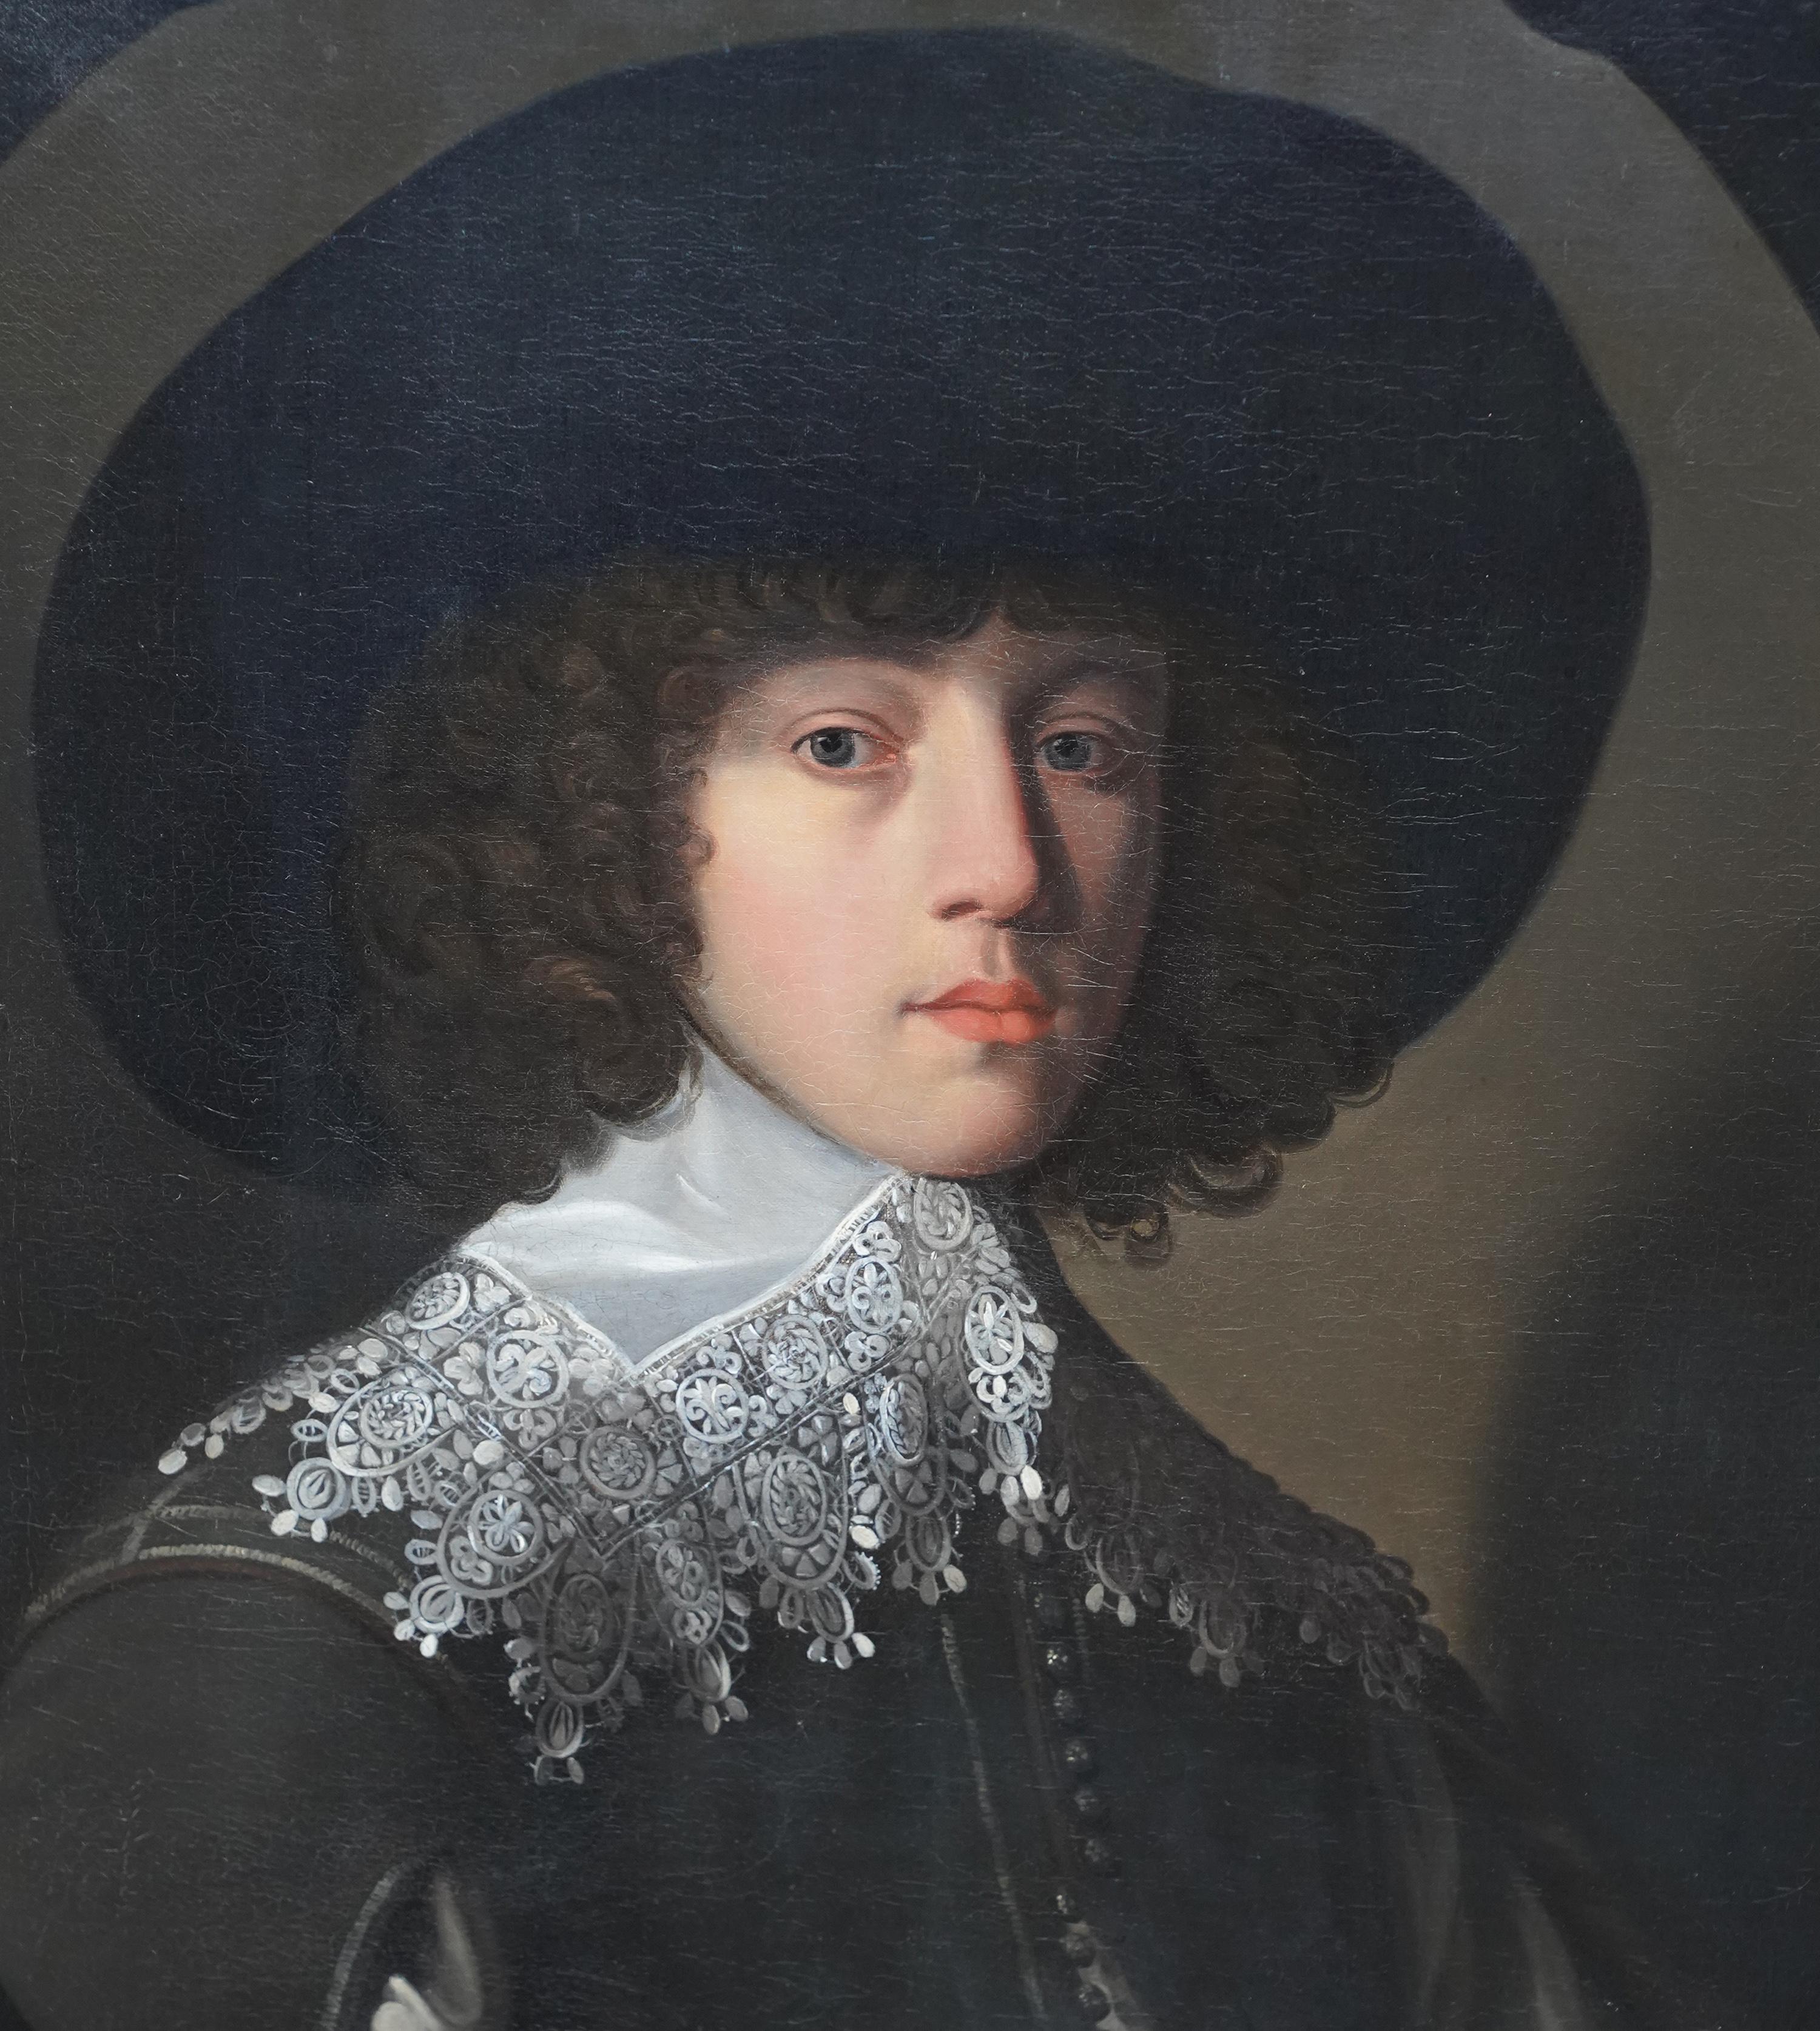 This superb Dutch Old Master portrait oil painting is attributed as by a follower of Dutch 17th century artist Gerrard van Honthorst. The original of this painting hangs in Wilton House, Wiltshire, home to the 18th Earl and Countess of